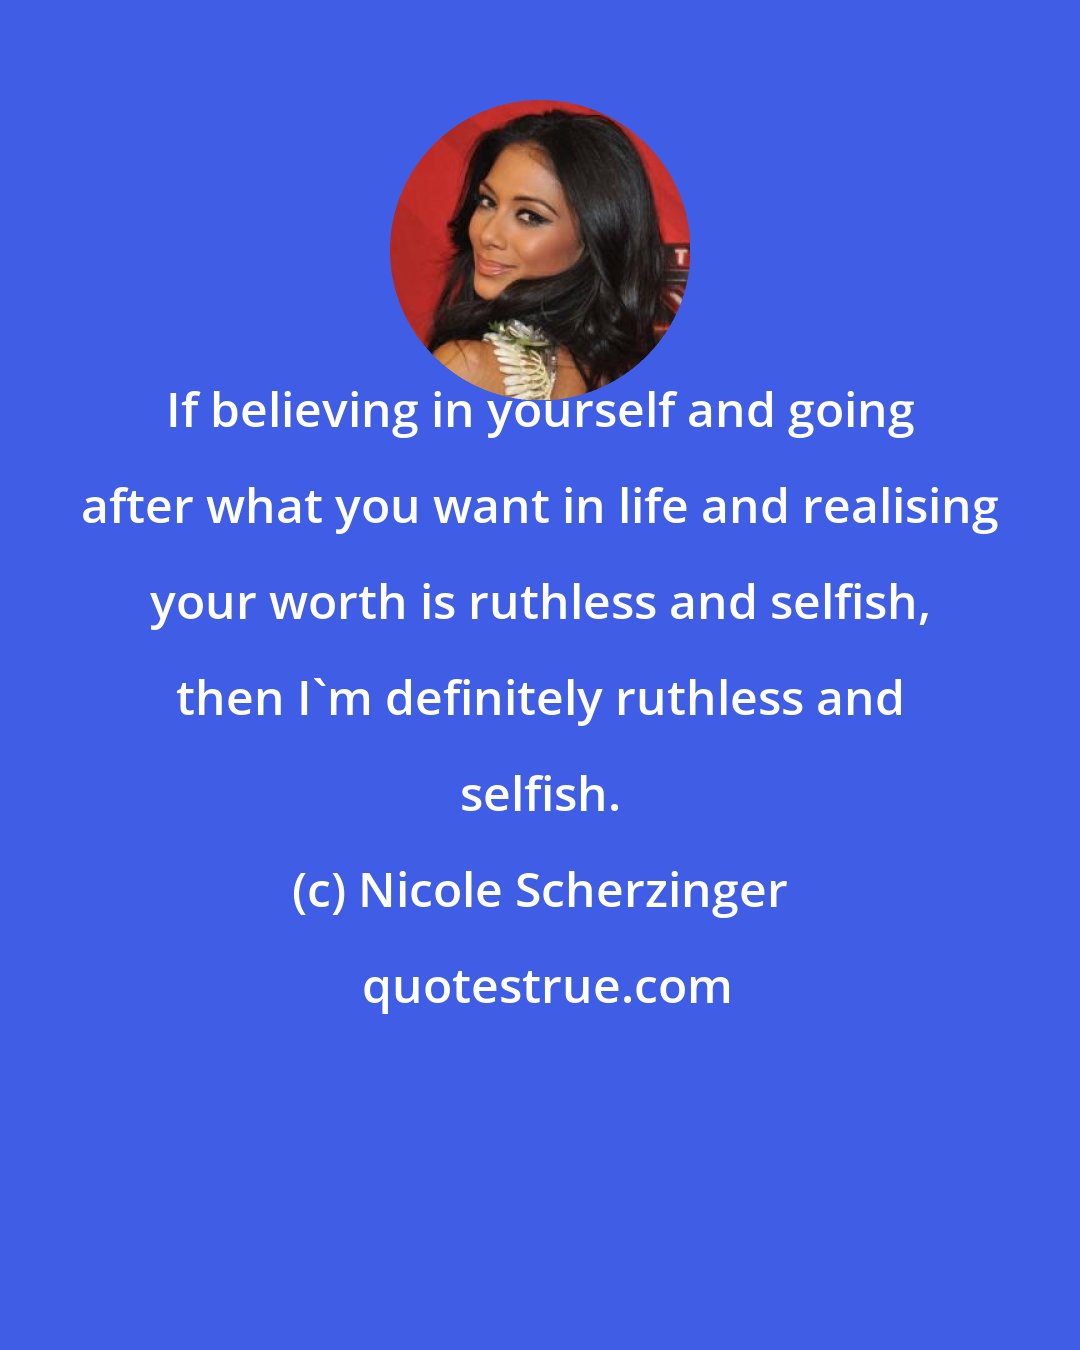 Nicole Scherzinger: If believing in yourself and going after what you want in life and realising your worth is ruthless and selfish, then I'm definitely ruthless and selfish.